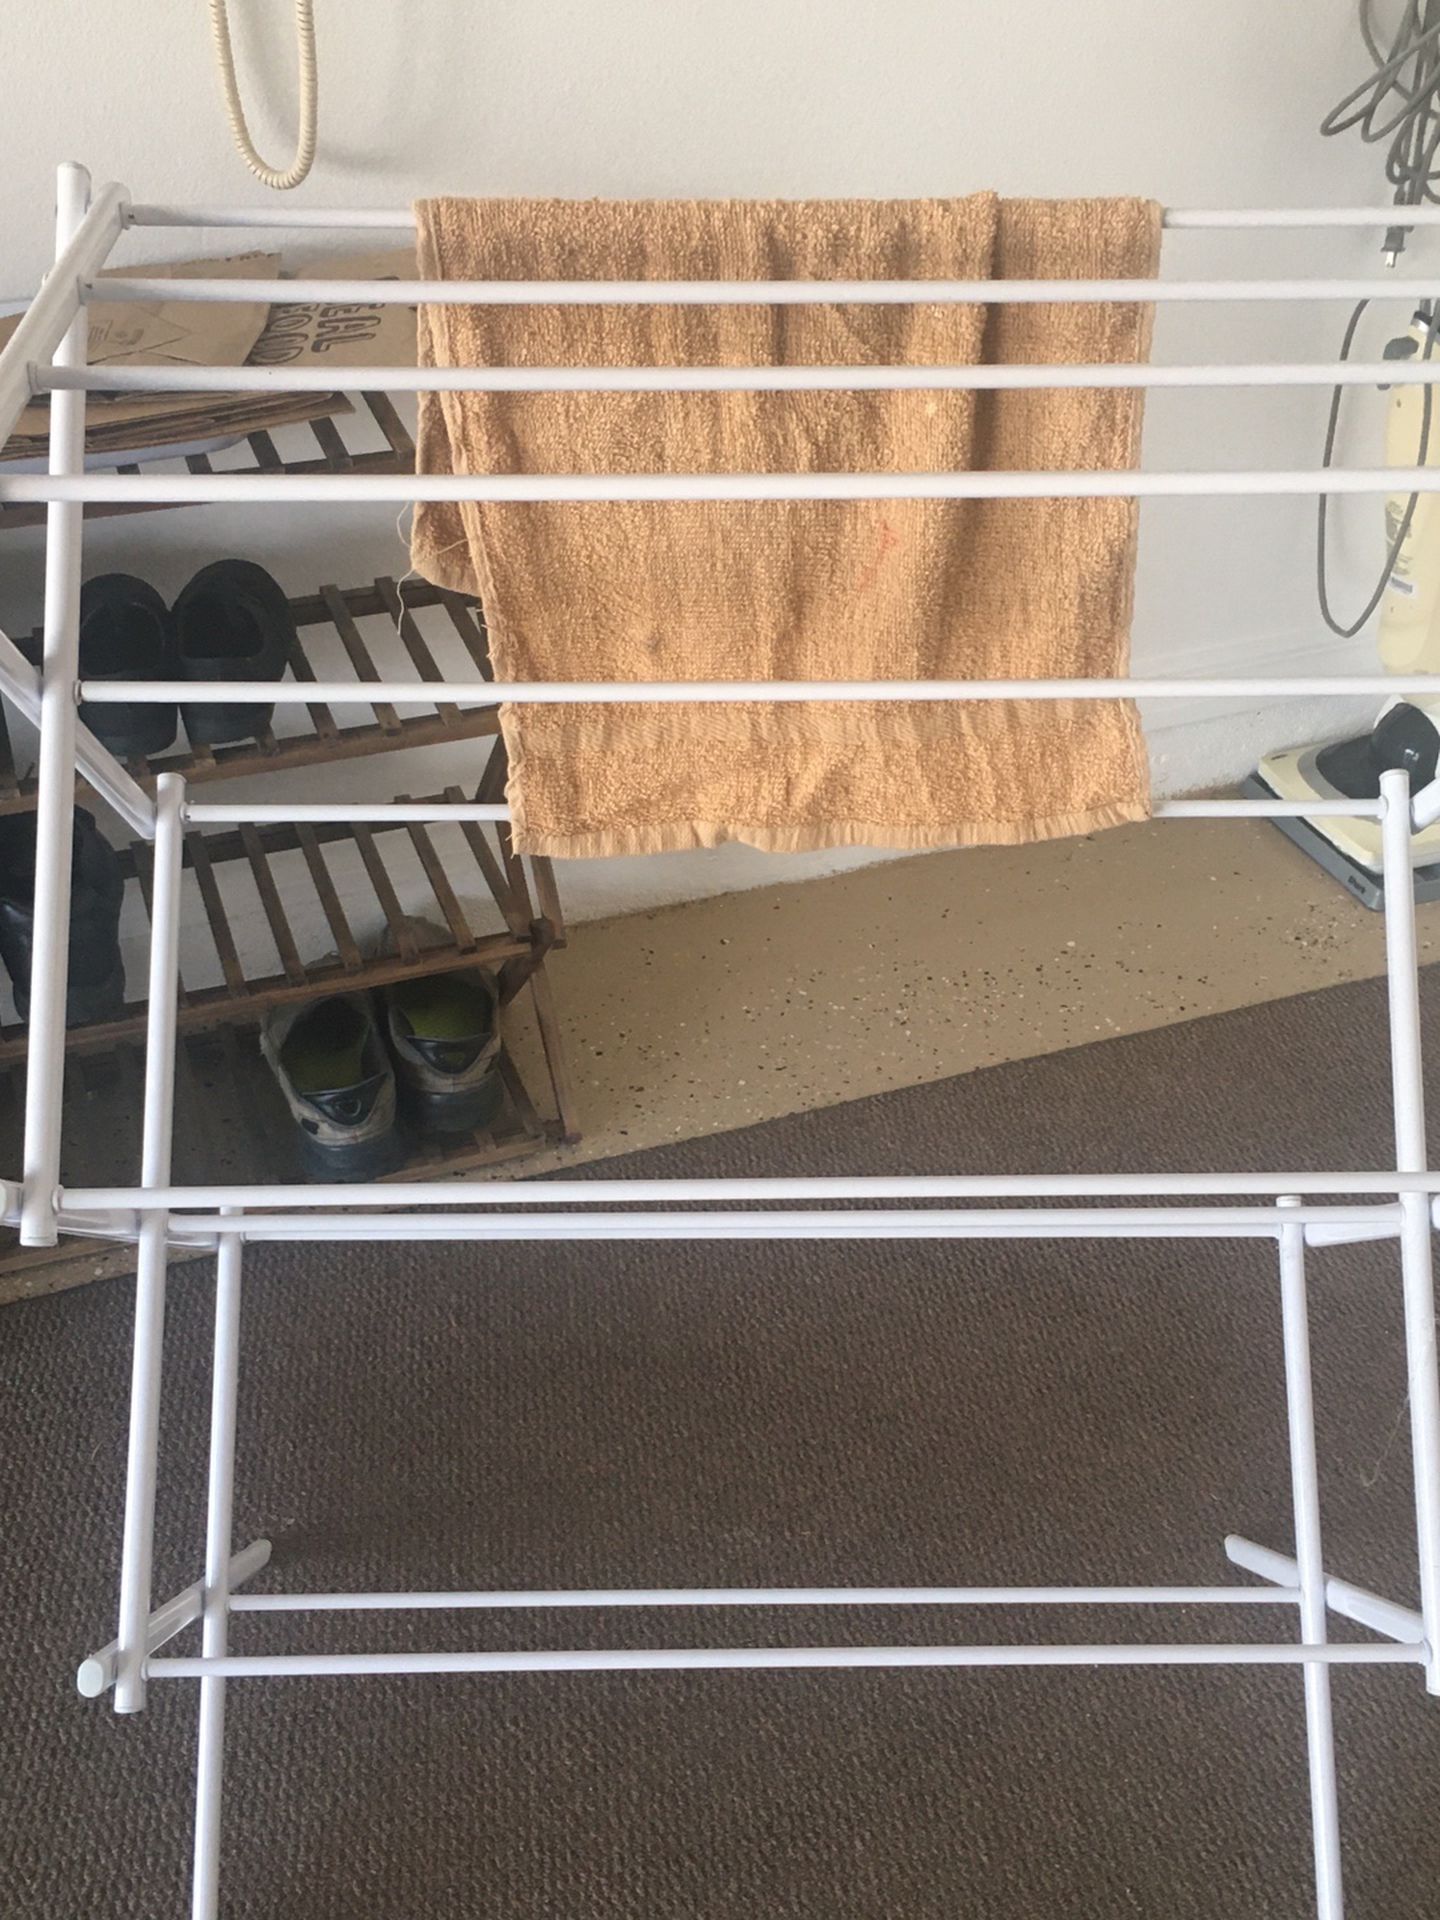 Clothes Drying Rack Folding